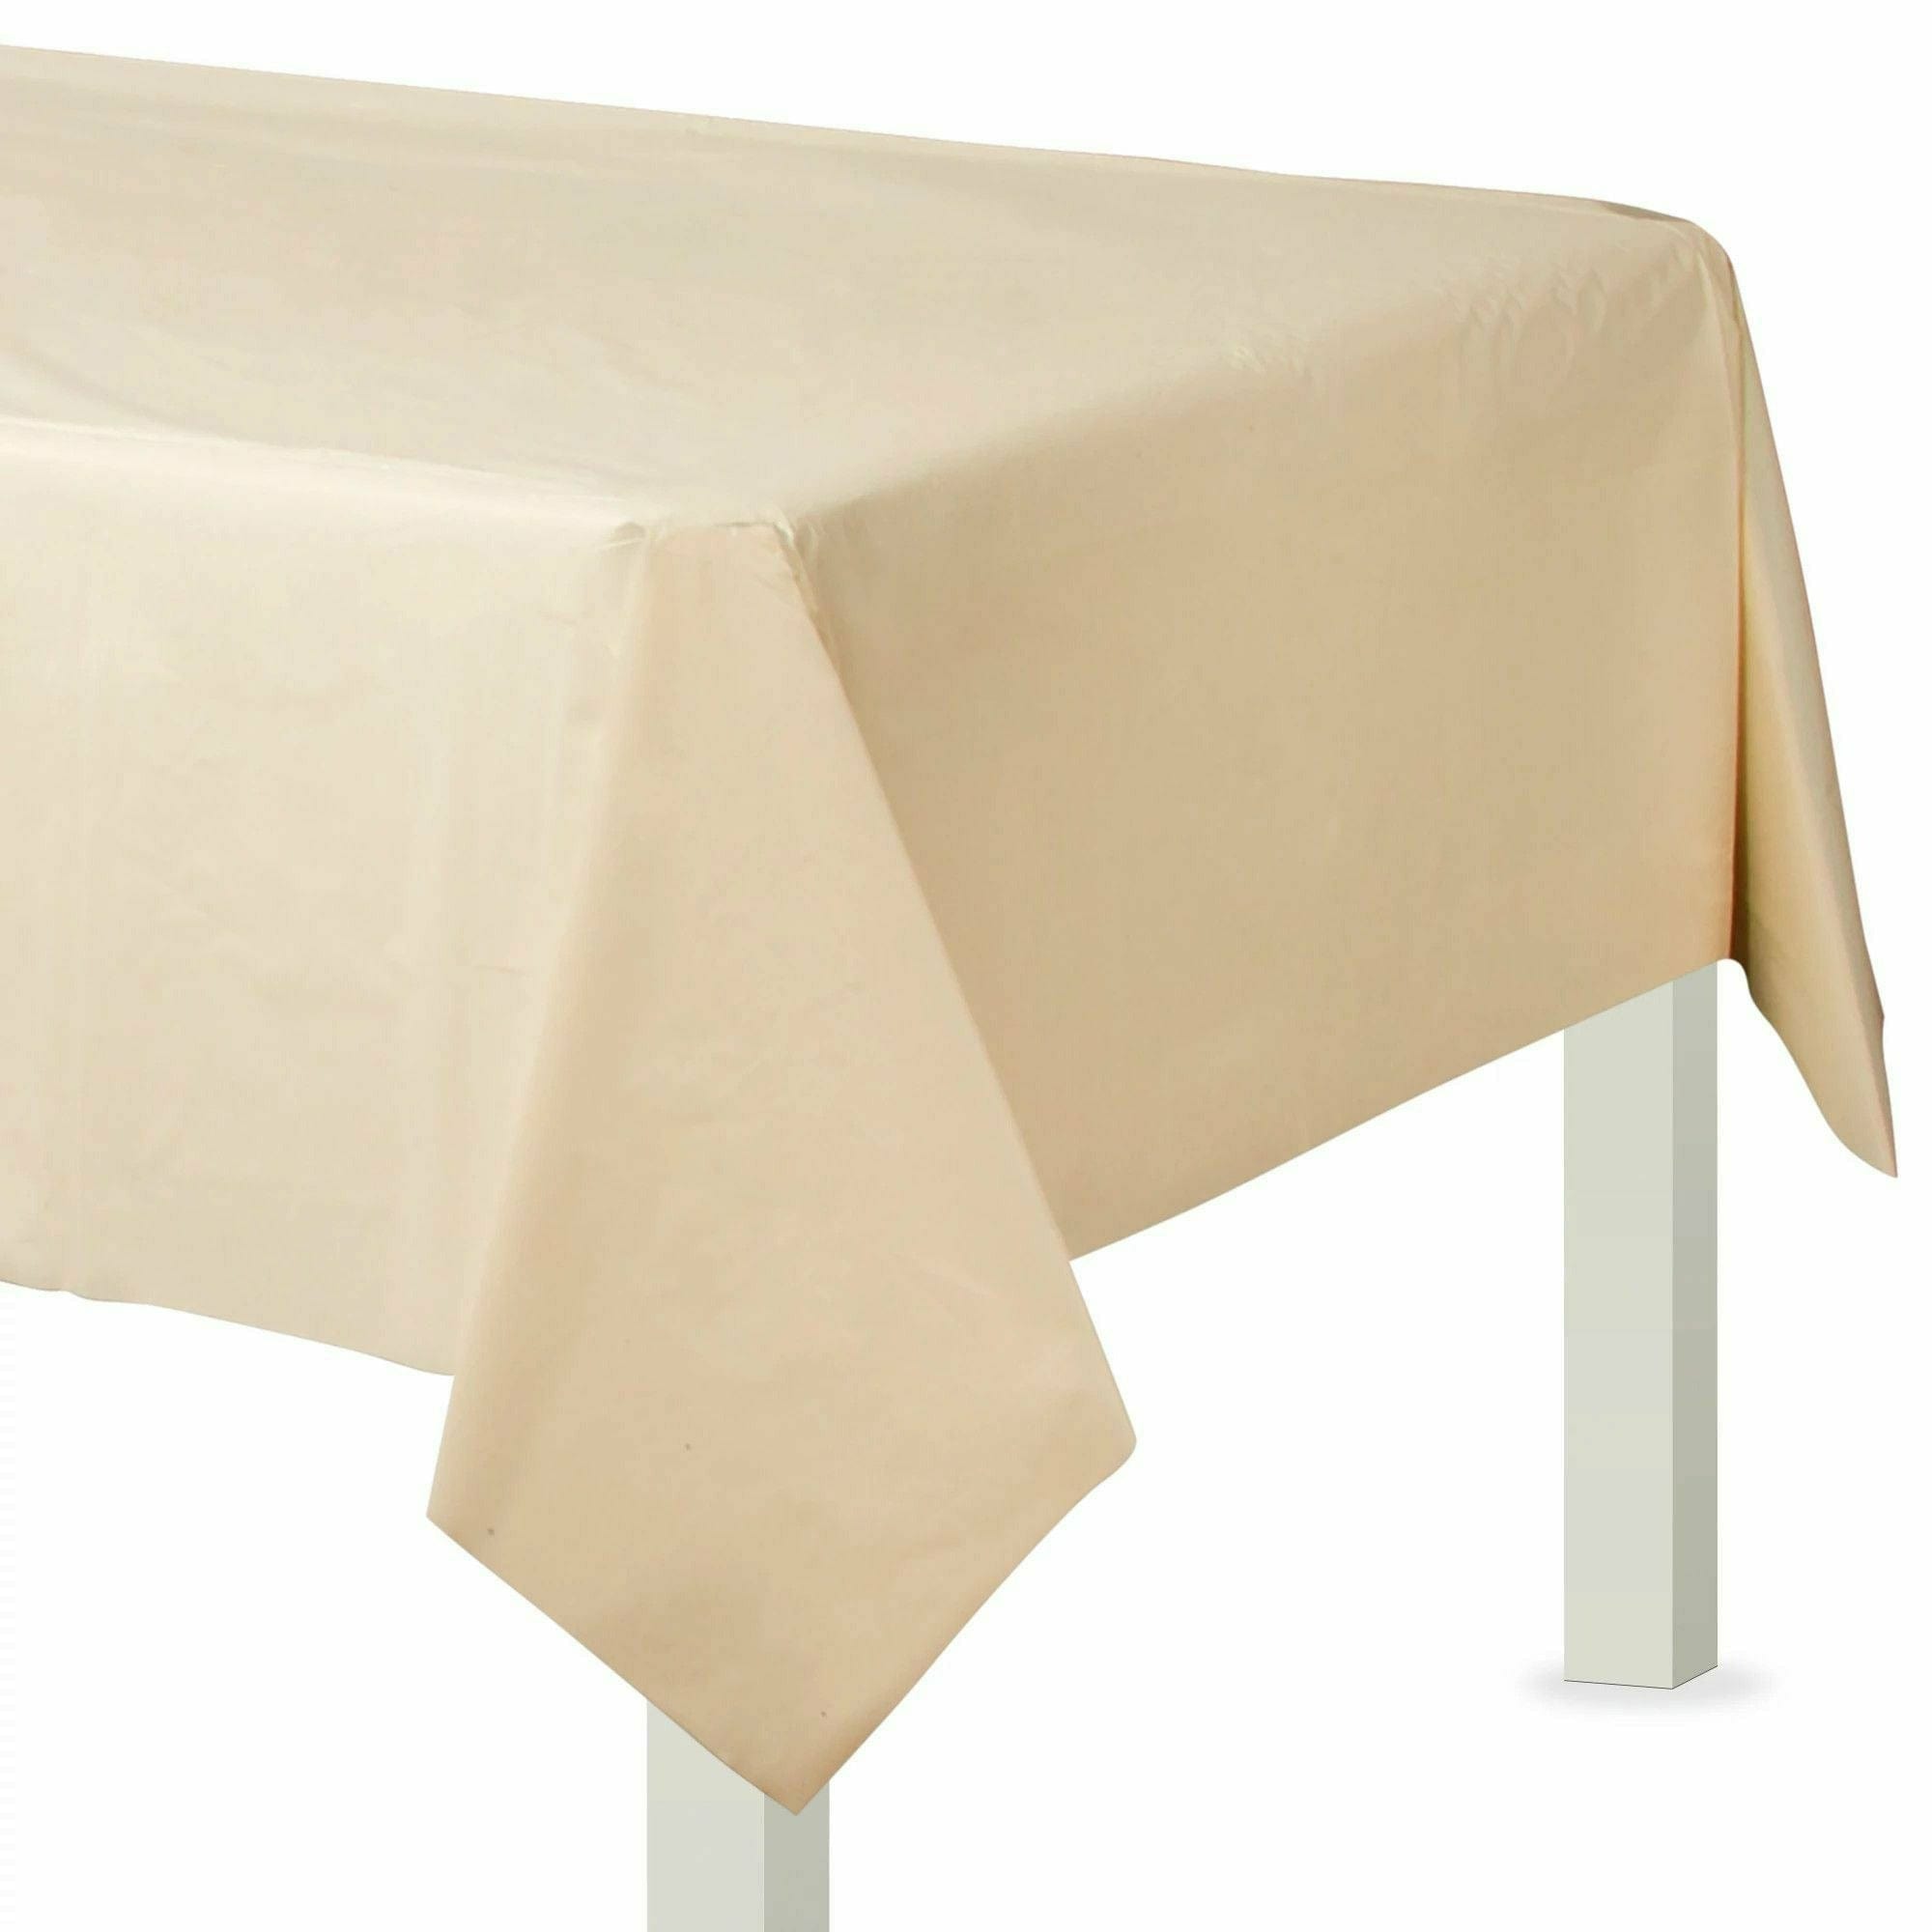 Amscan BASIC Vanilla Creme - Flannel Backed Table Cover